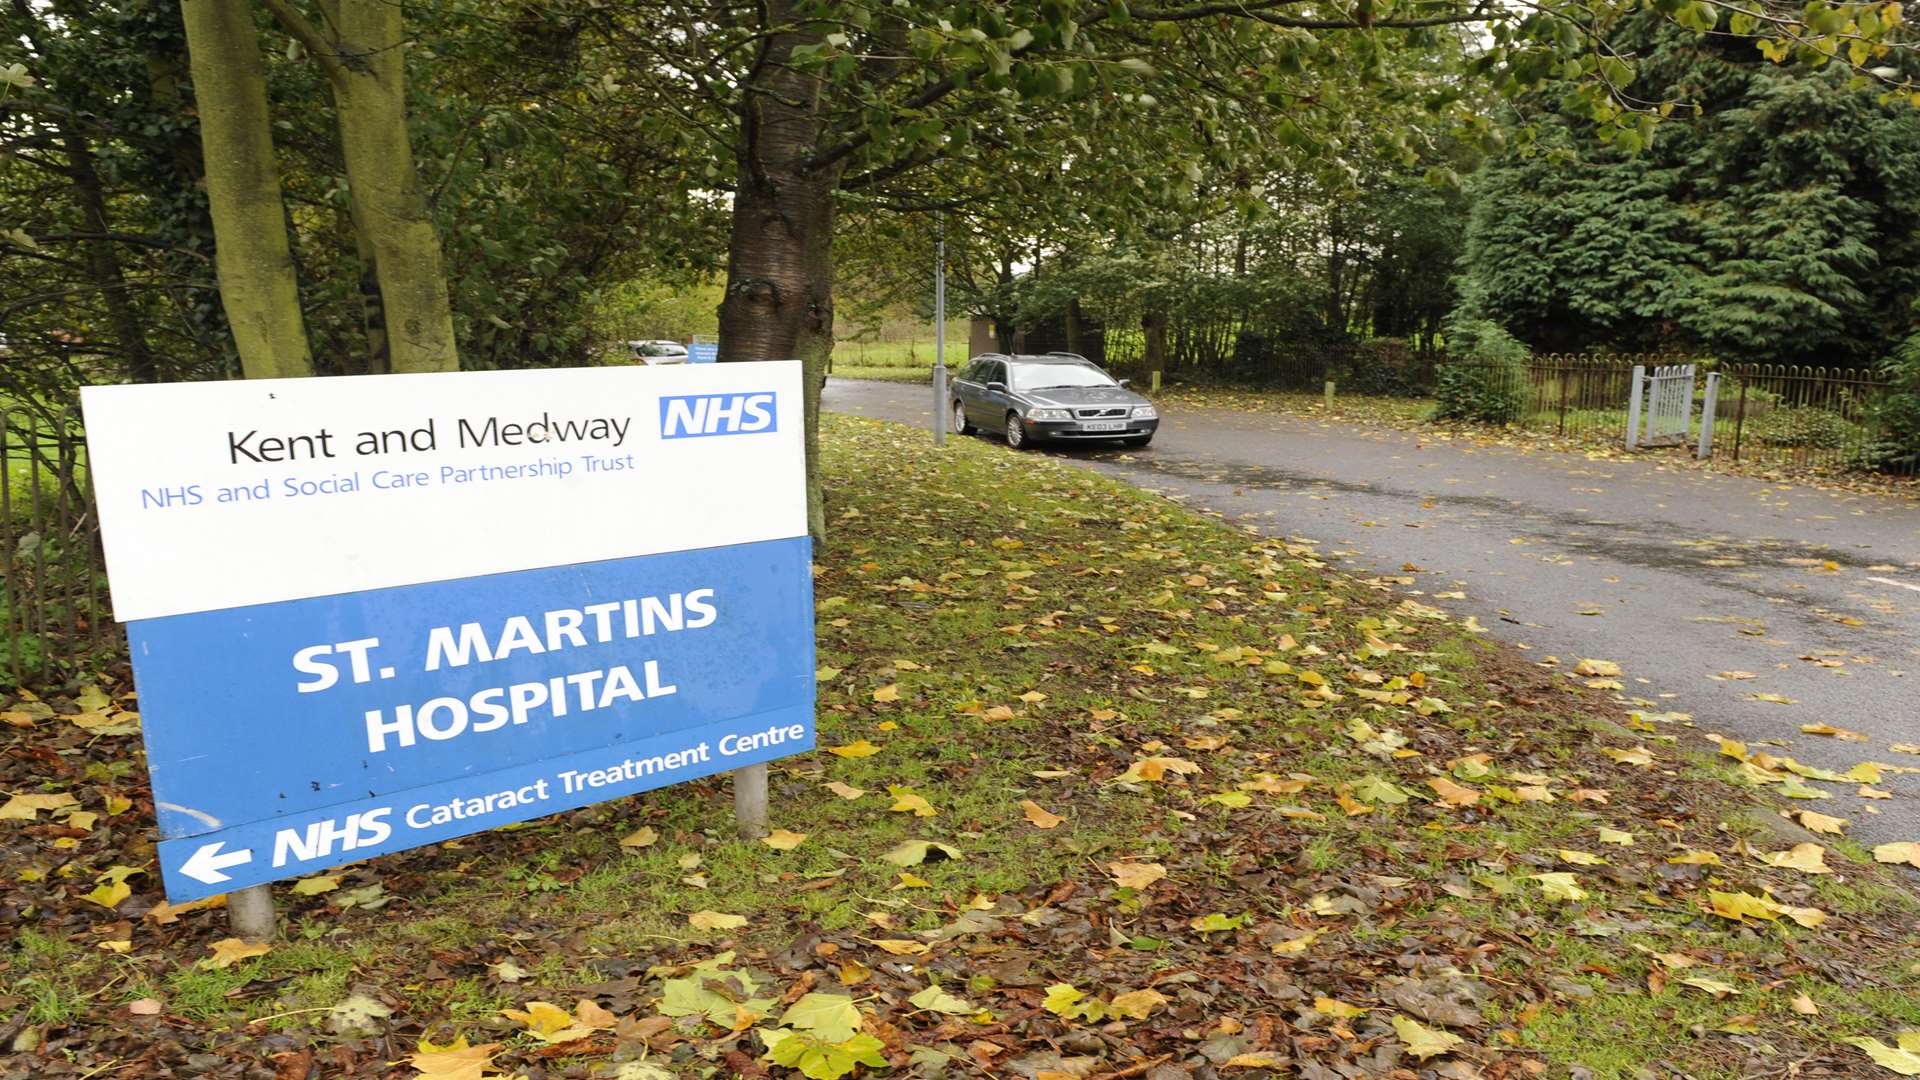 St Martins Hospital in Canterbury